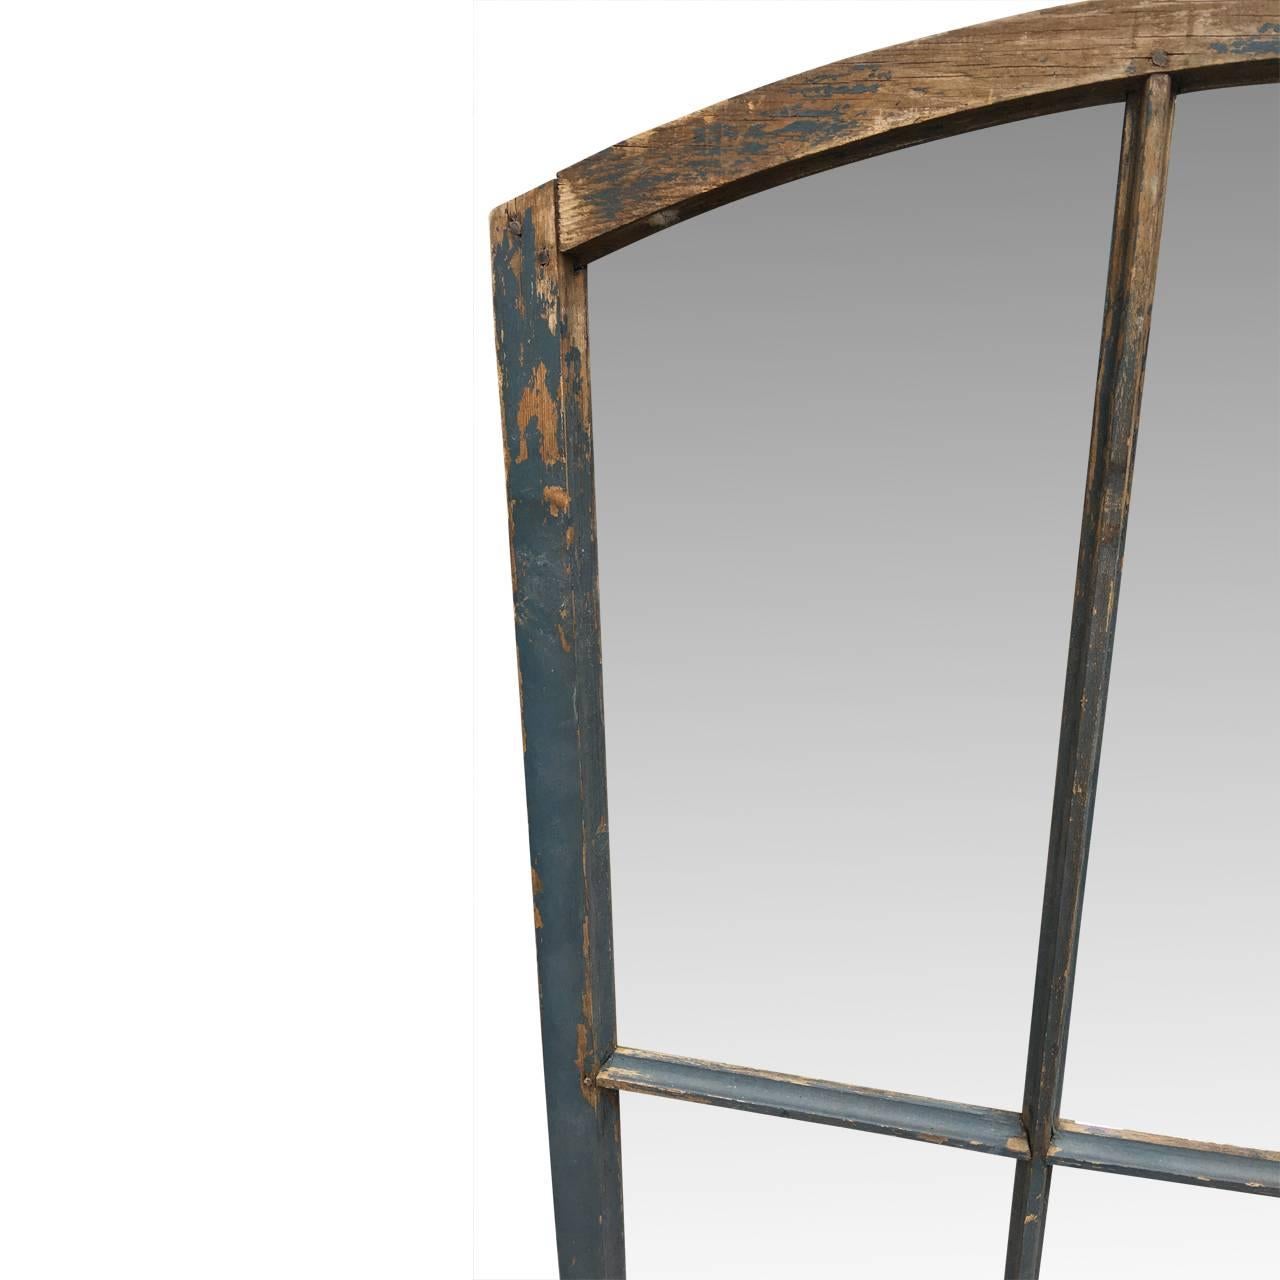 Large 19th century folk art window frame in original paint and patina, with six newly installed pieces of mirror glass.